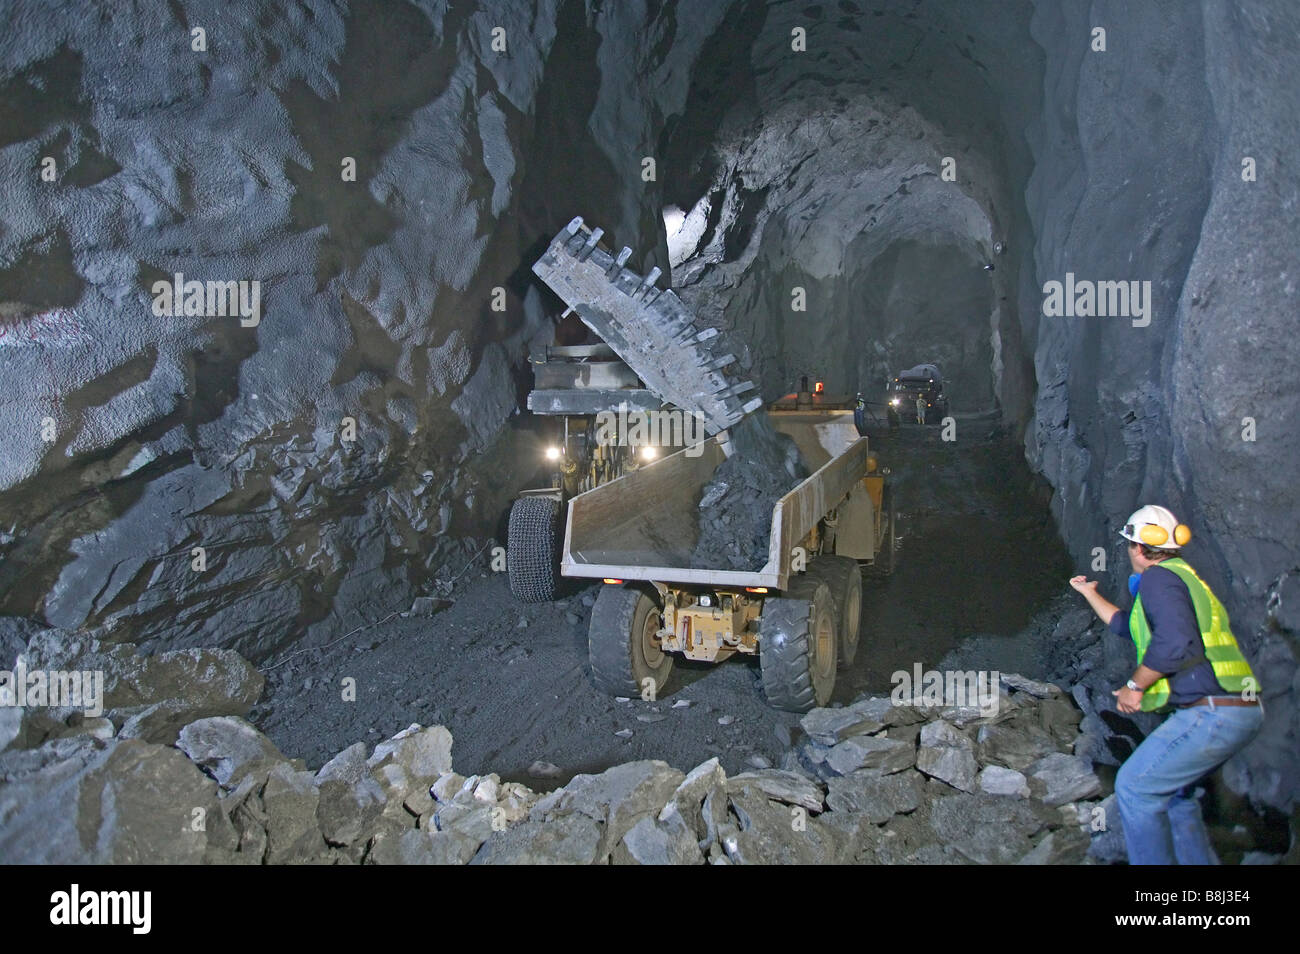 Excavation of connecting tunnel for hydropower plant in Ecuador which will produce industrial and domestic electricity. Stock Photo